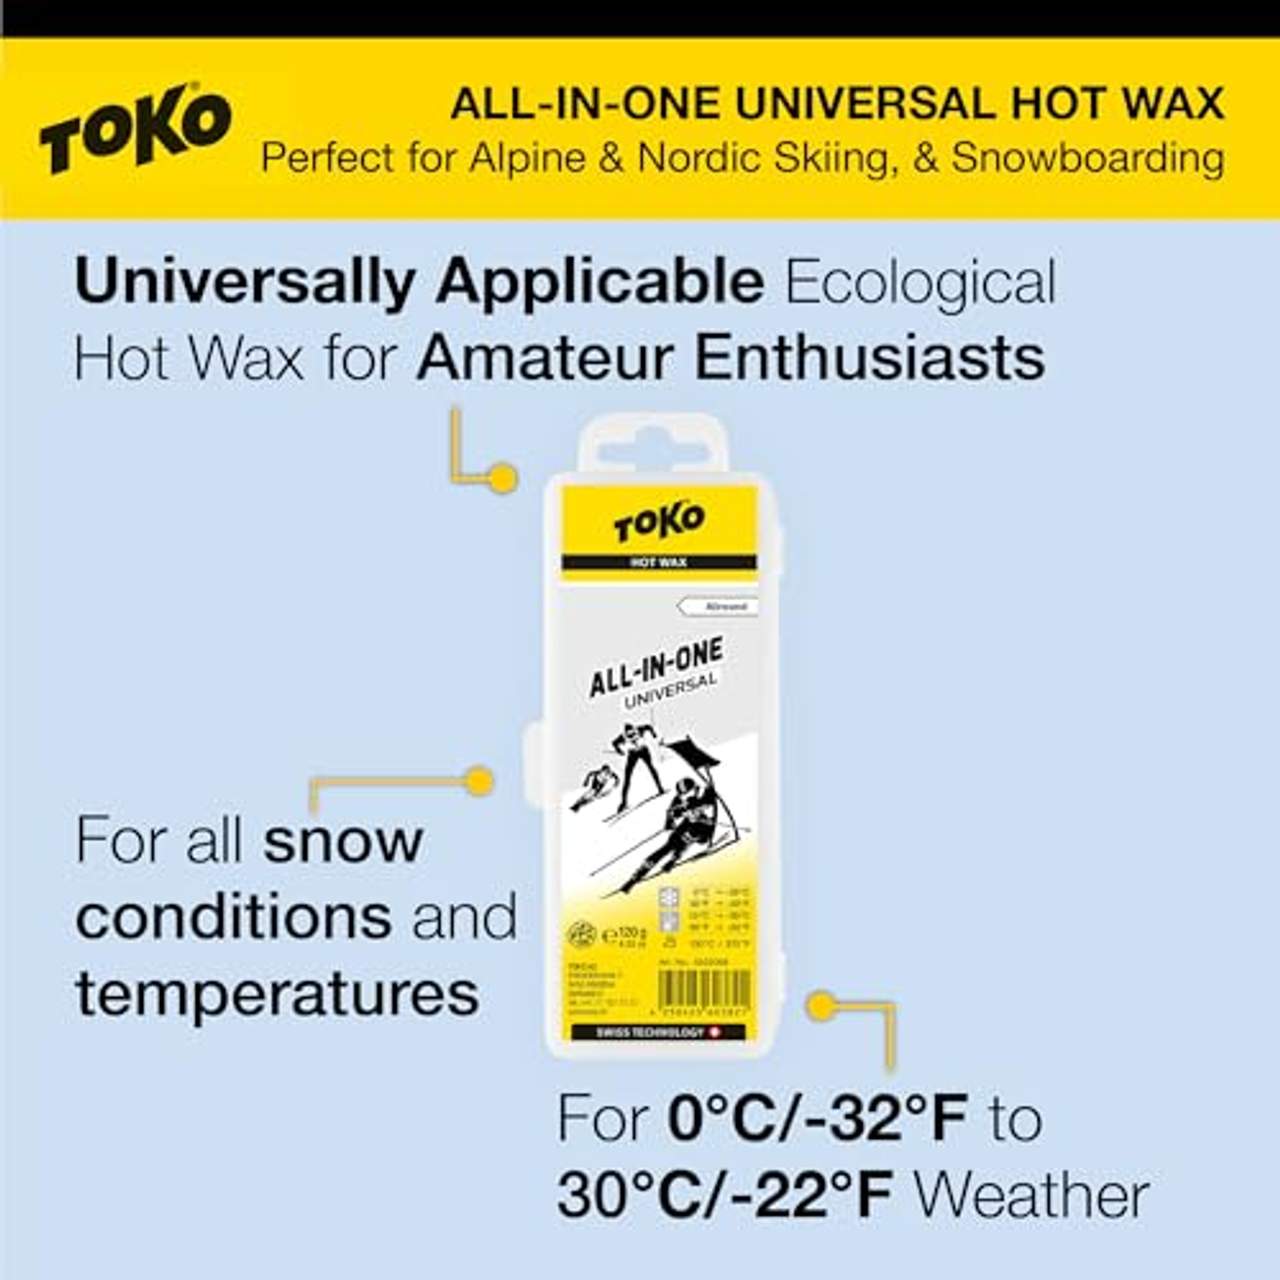 Toko Wachs All-in-one Uni 0°C /-30°C 120g Wax